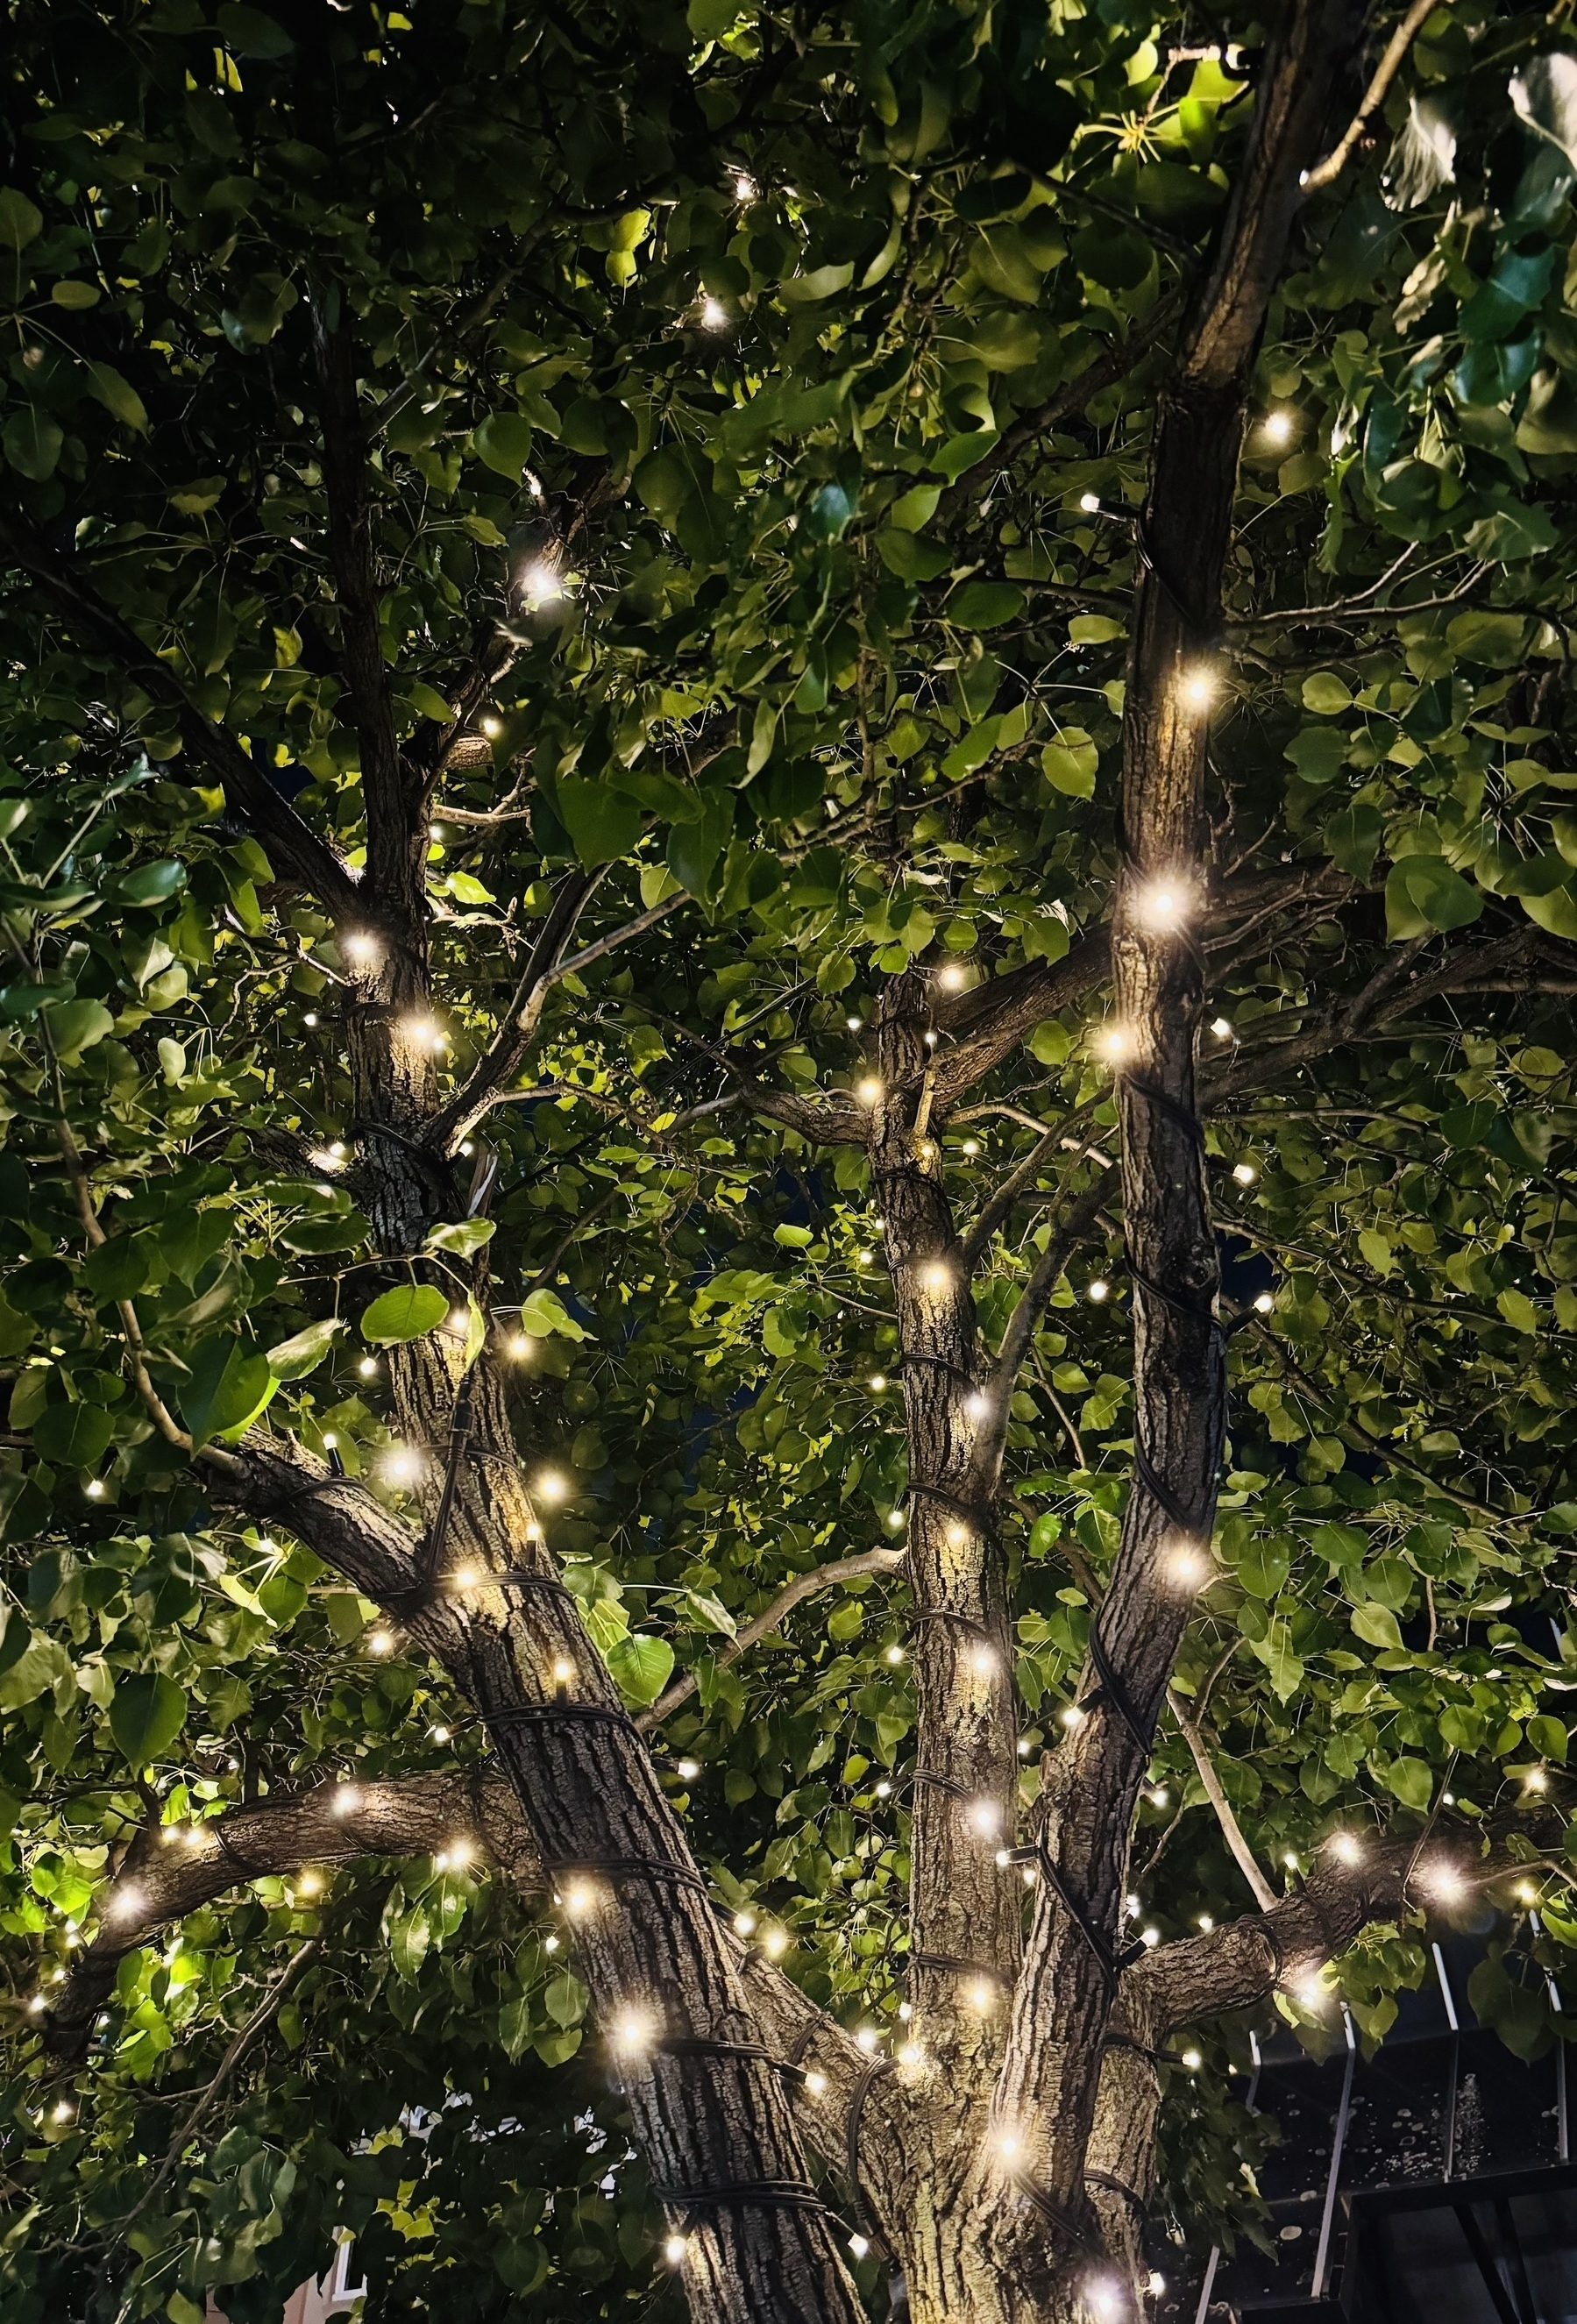 A leafy tree lit up by strands of lights that are wrapped around the trunks.